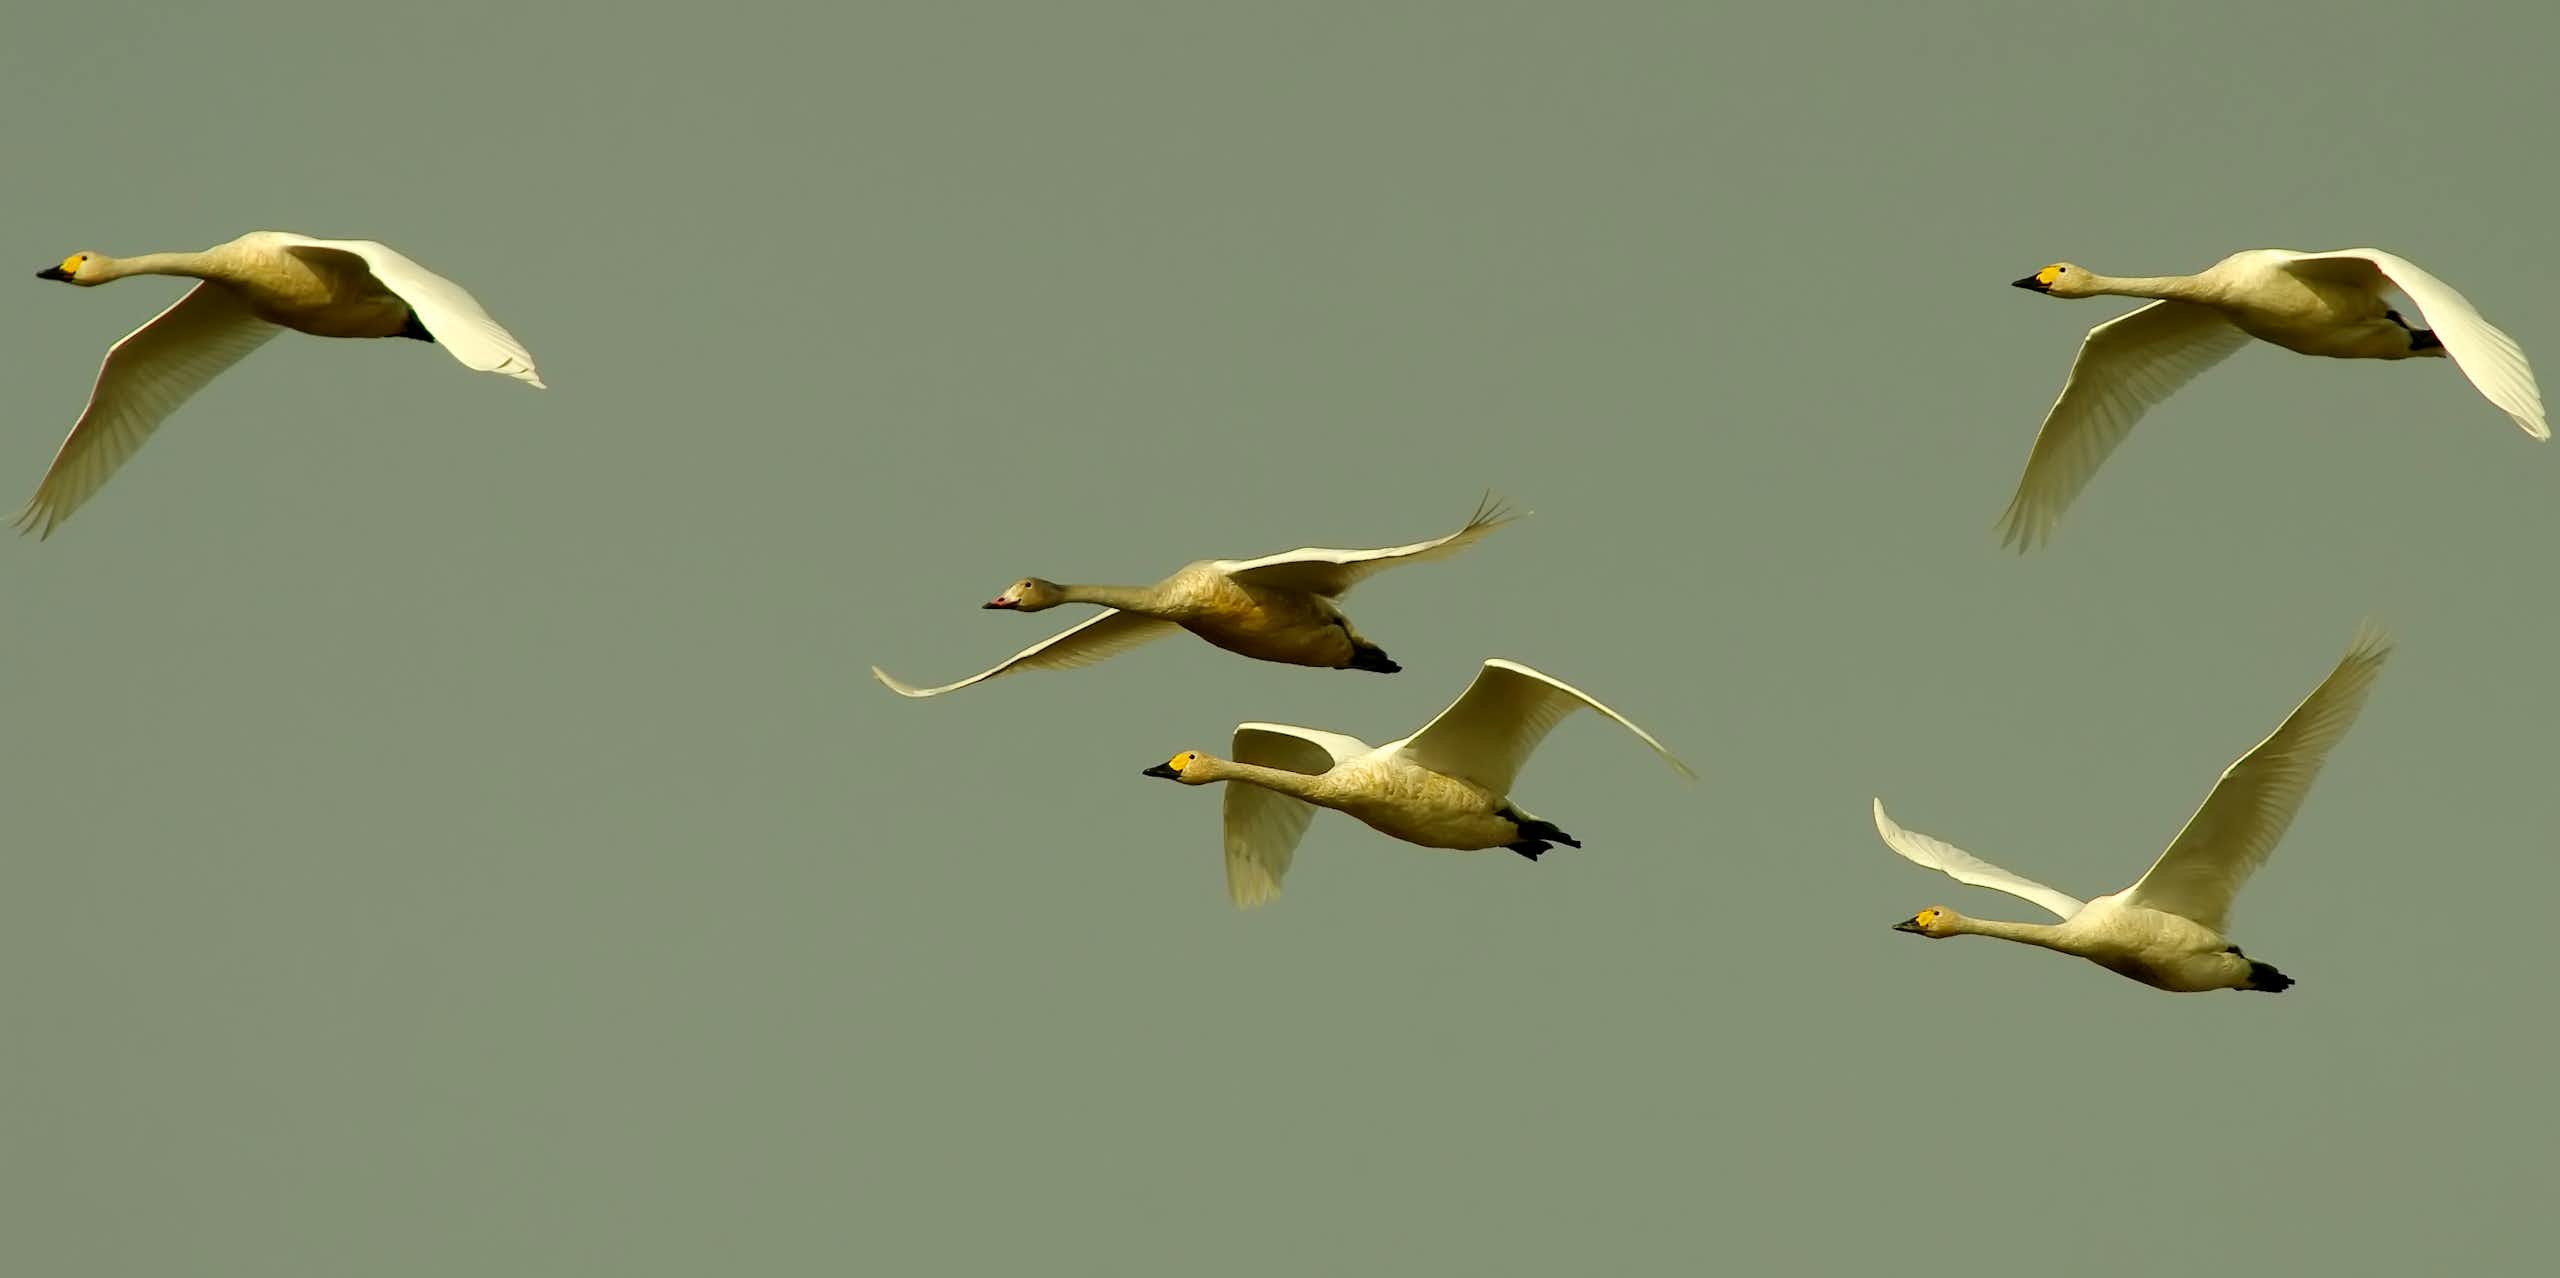 Five swans flying against a grey sky.